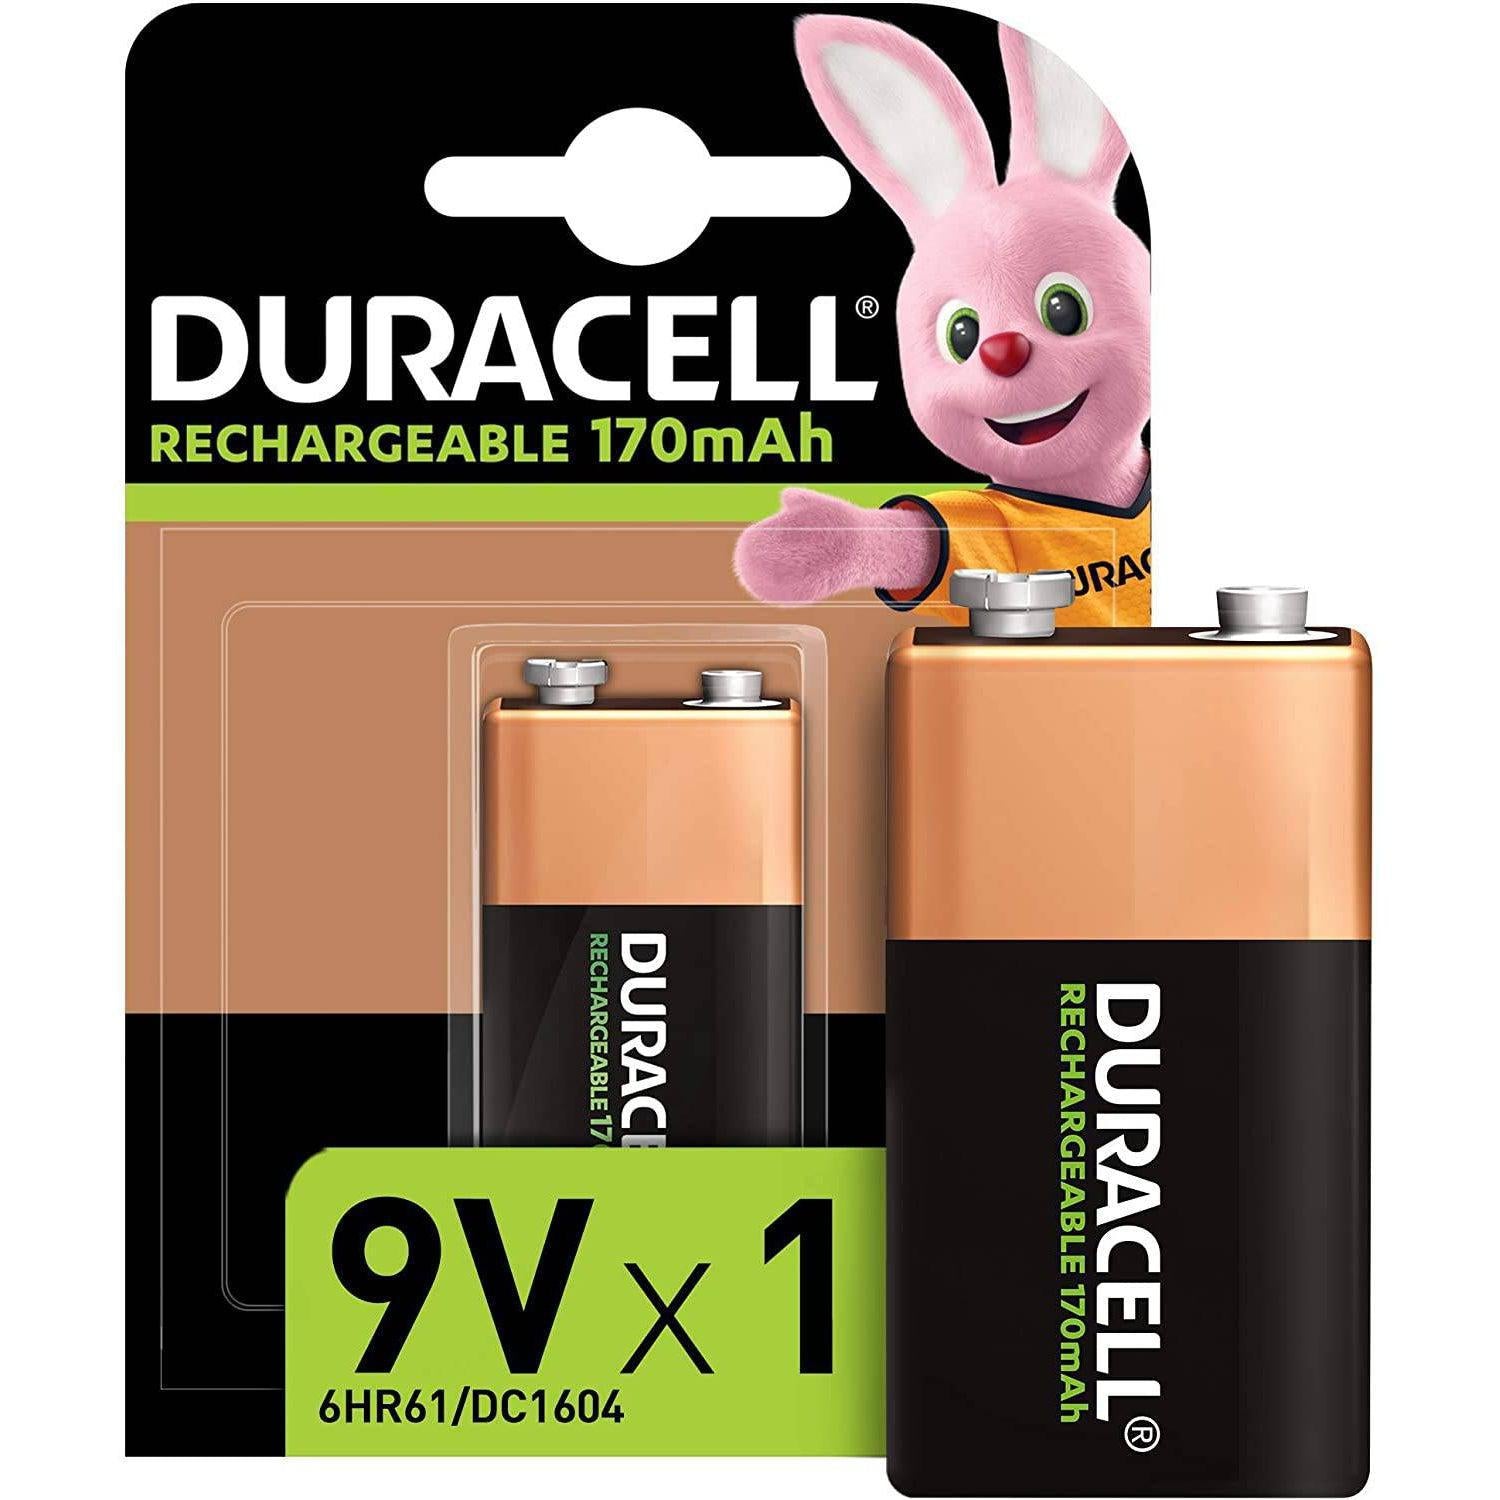 Duracell Rechargeable 9V 170 mAh Battery, Pack of 1 - Healthxpress.ie